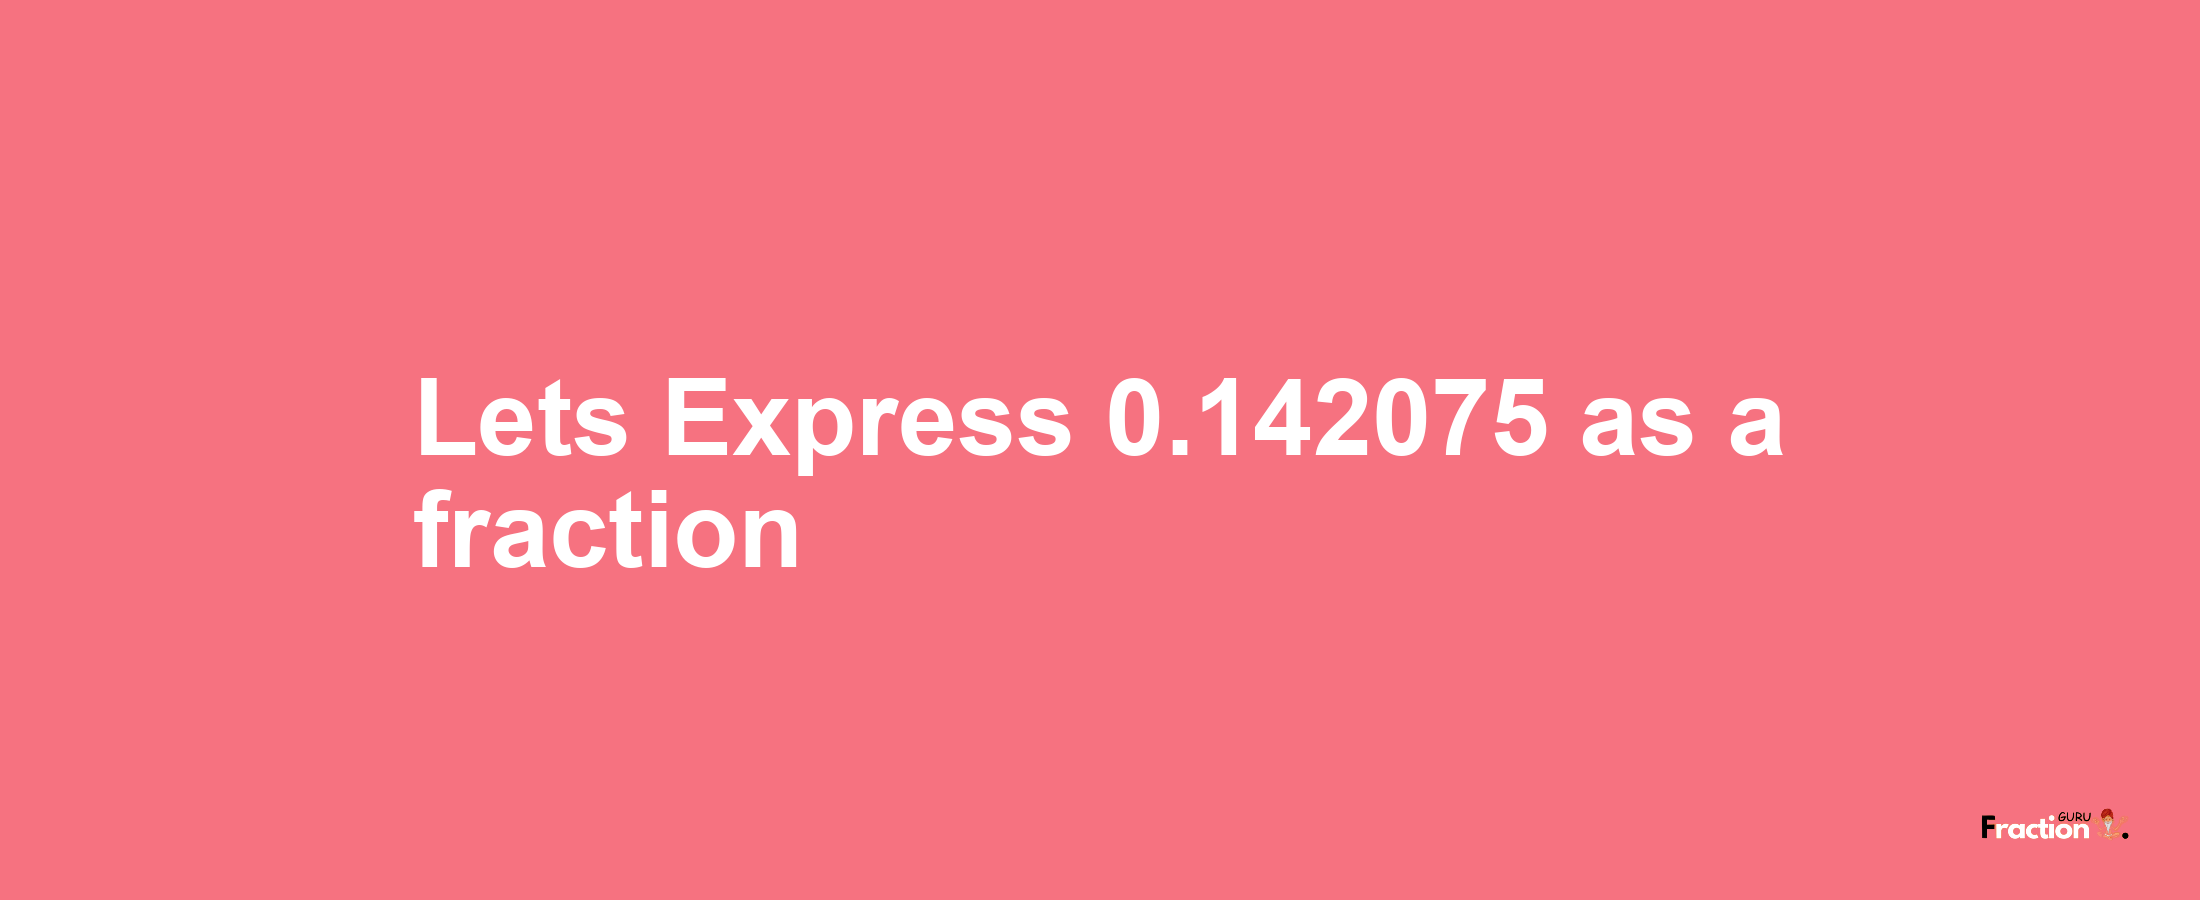 Lets Express 0.142075 as afraction